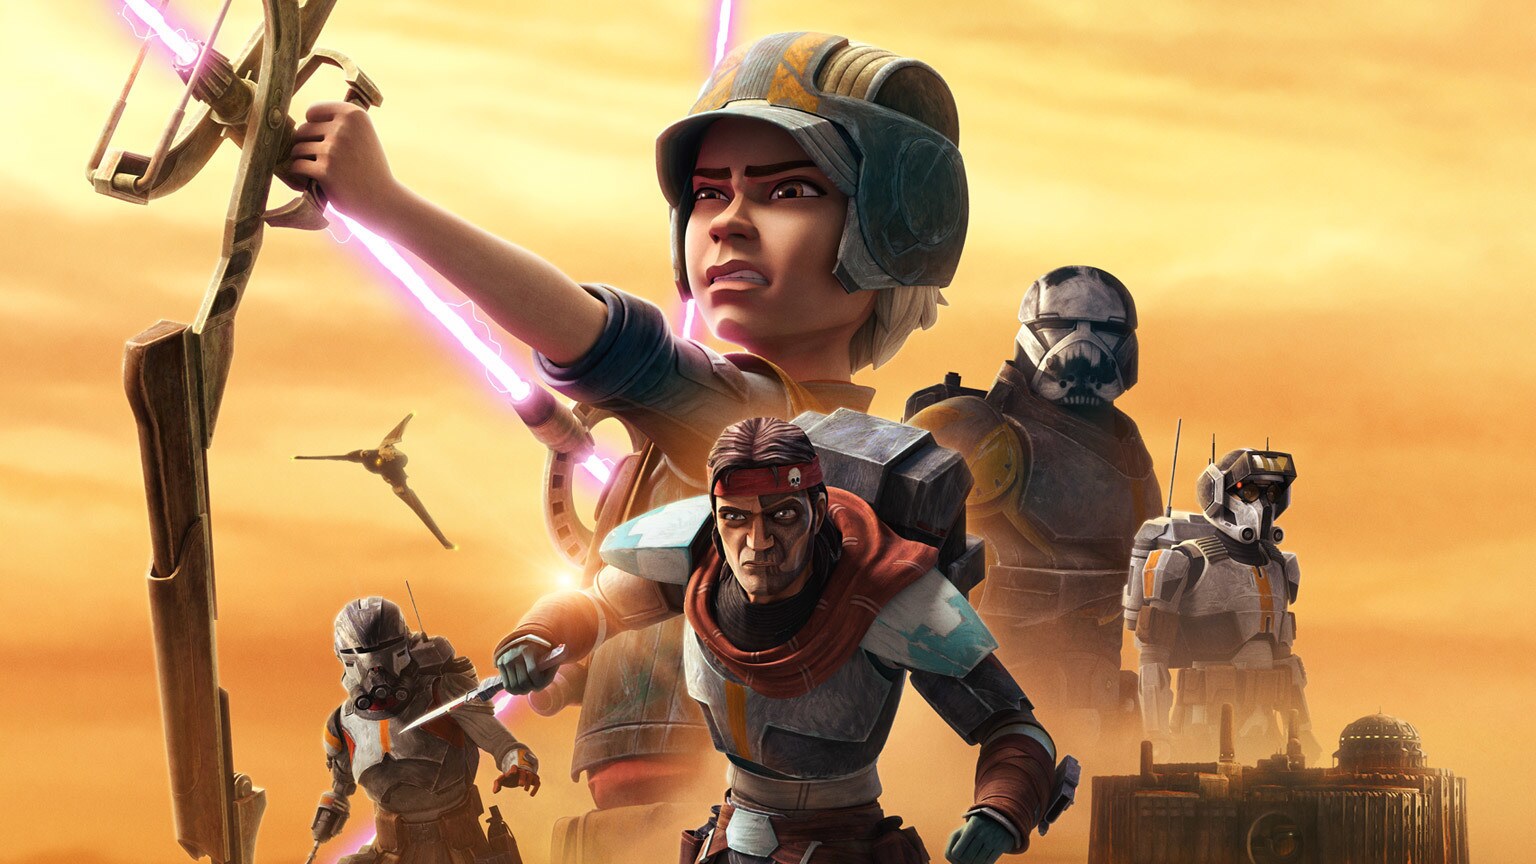 Clone Force 99 Is Back in New Star Wars: The Bad Batch Season 2 Trailer